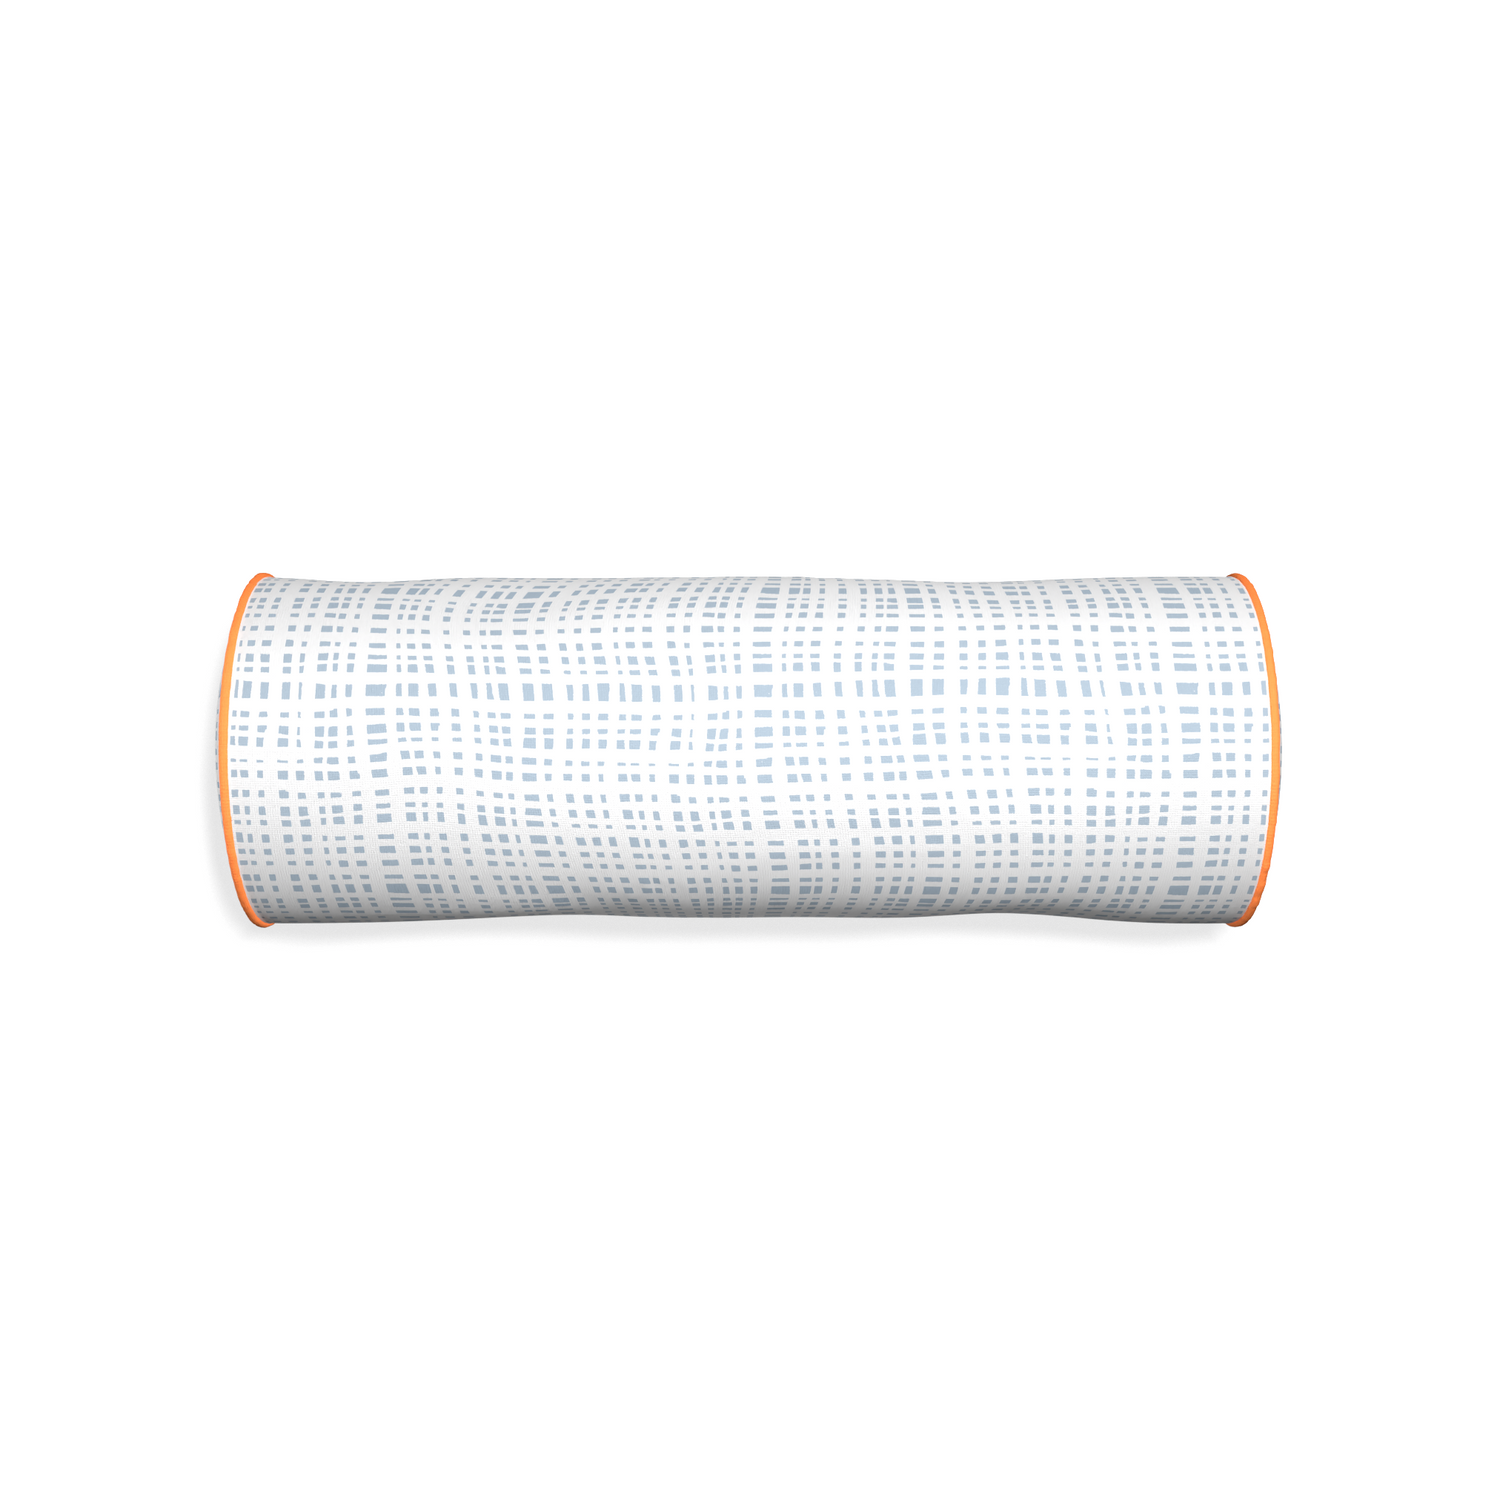 Bolster ginger custom plaid sky bluepillow with clementine piping on white background